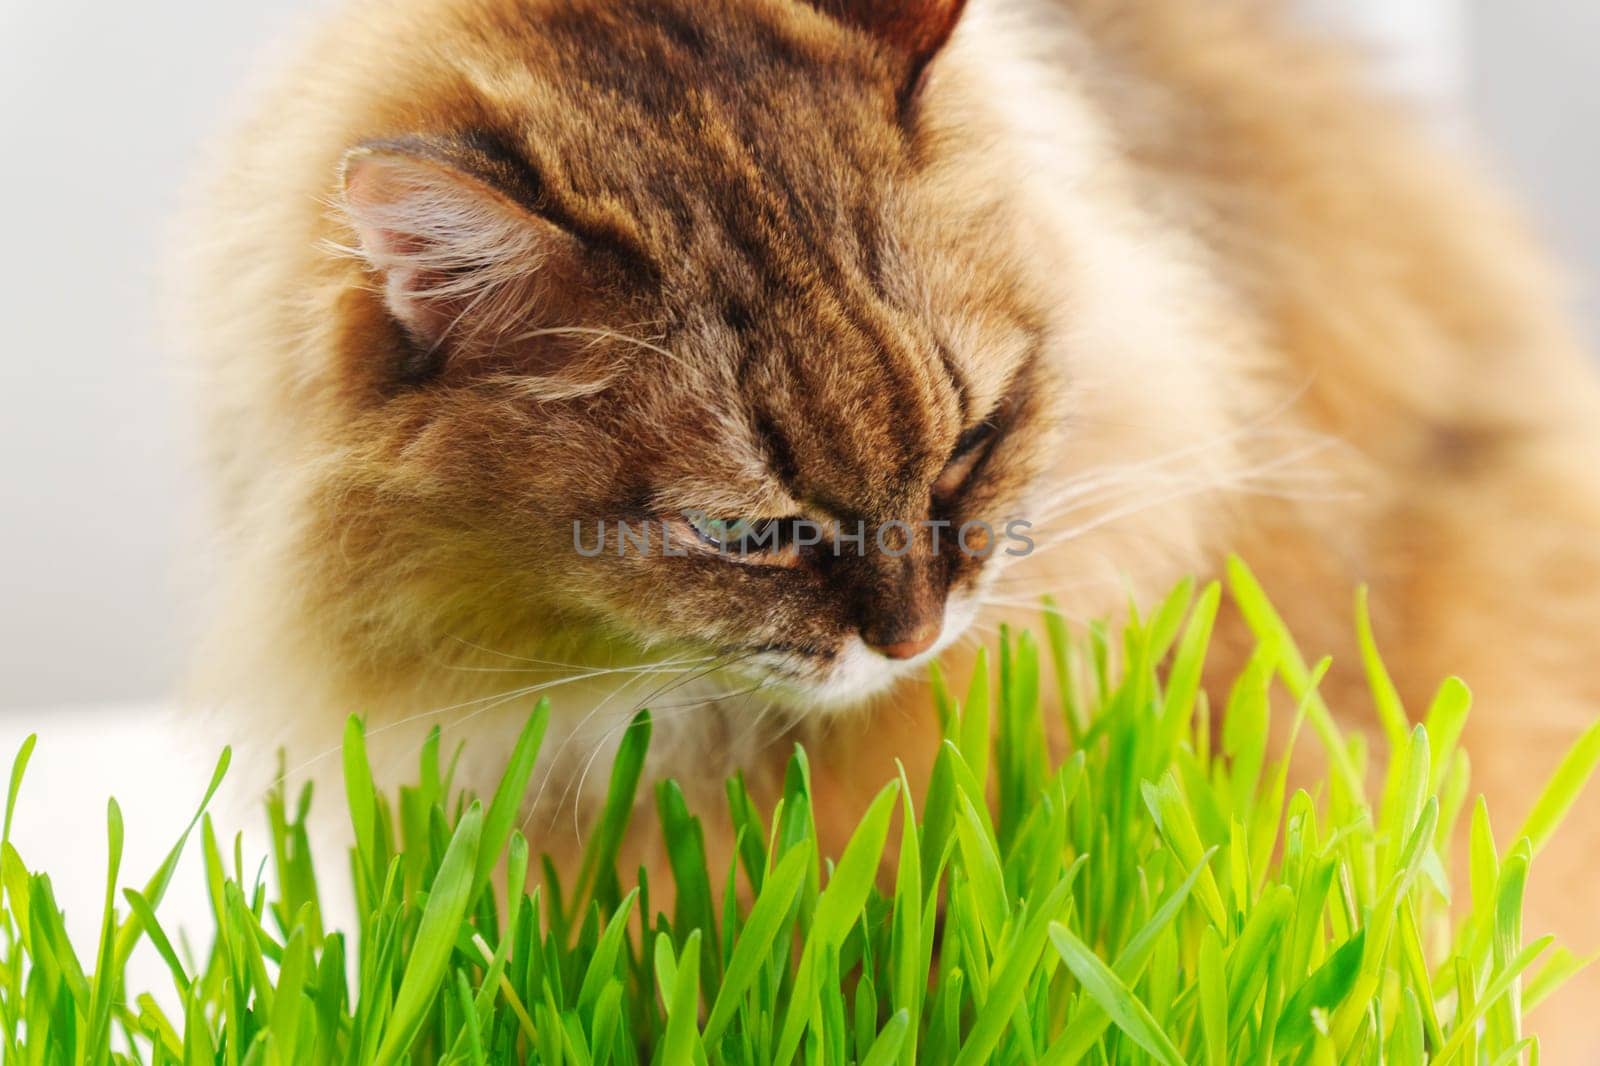 Cat eat fresh Grass Indoors, possibly as a way to aid its digestion. Selective focus by darksoul72